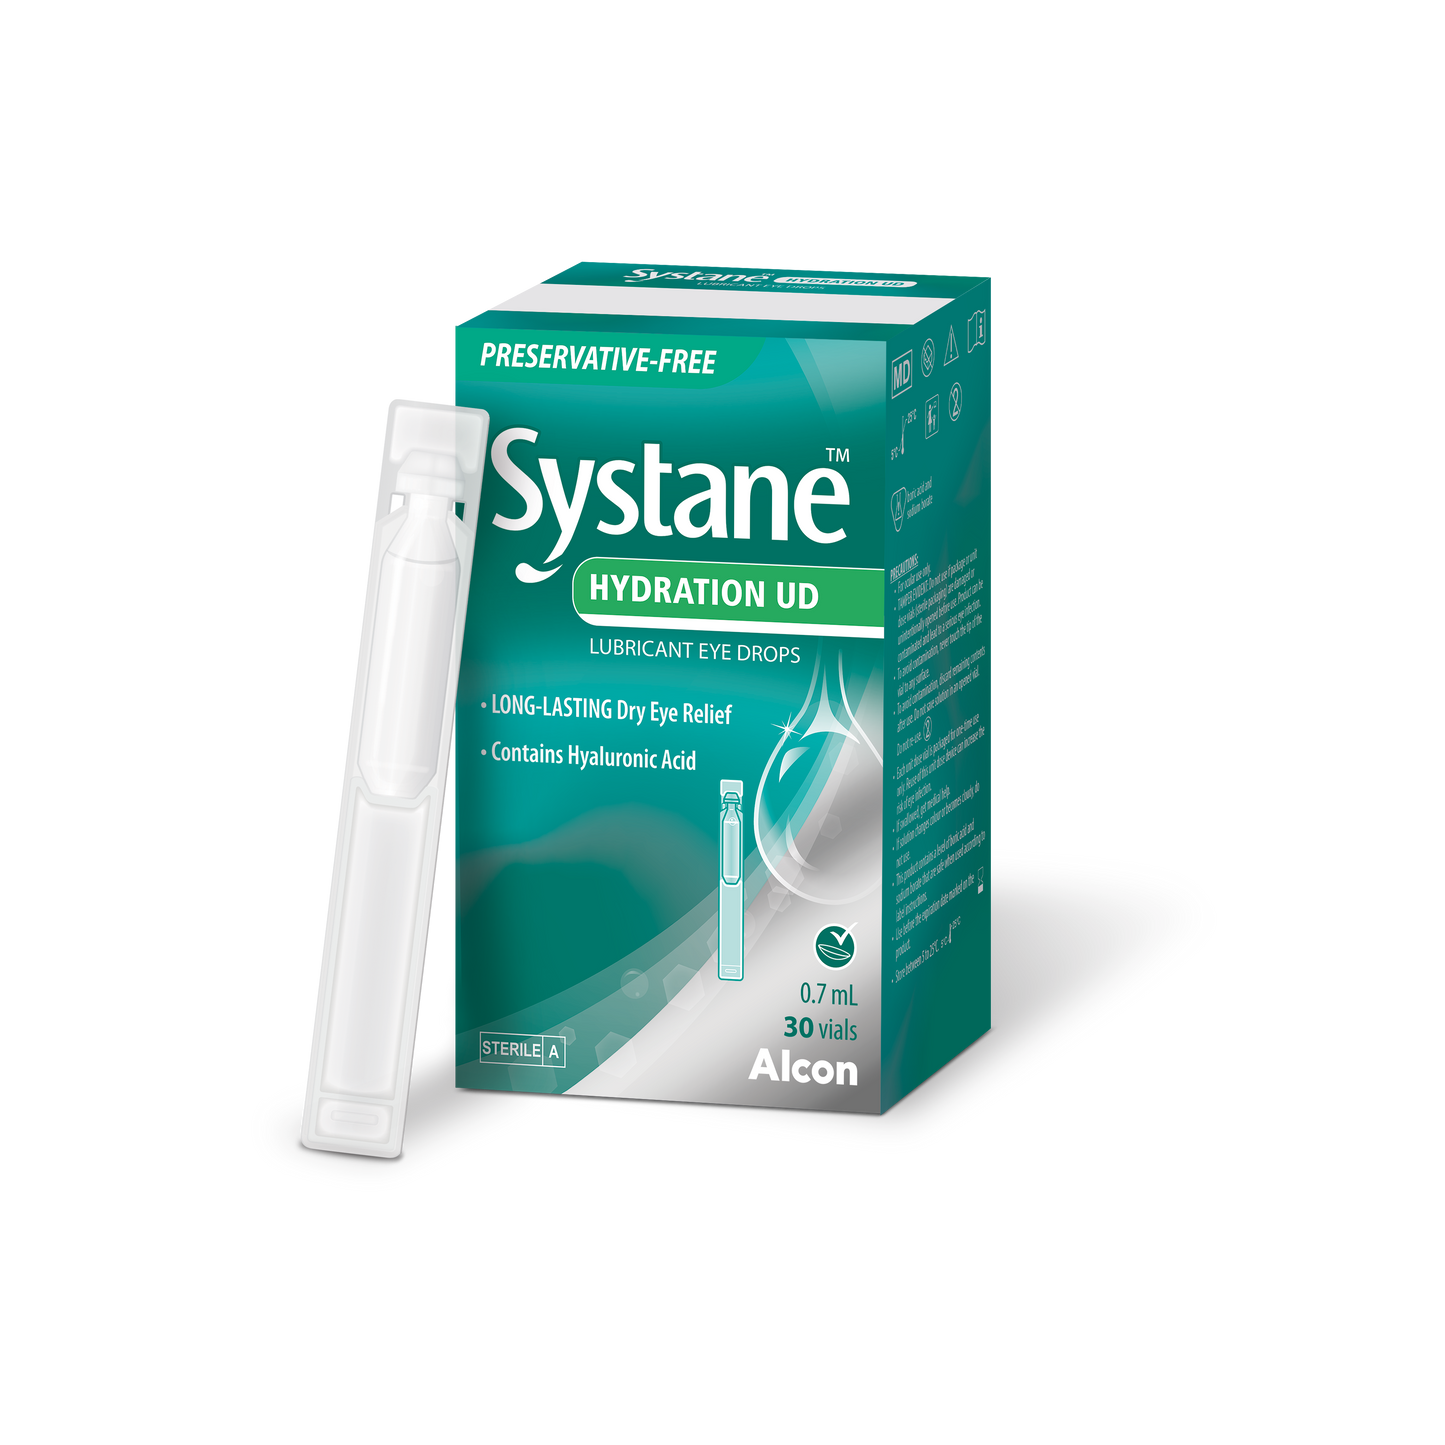 Systane Hydration UD Lubricating Eye Drops Vials 0.7mL 30 Pack